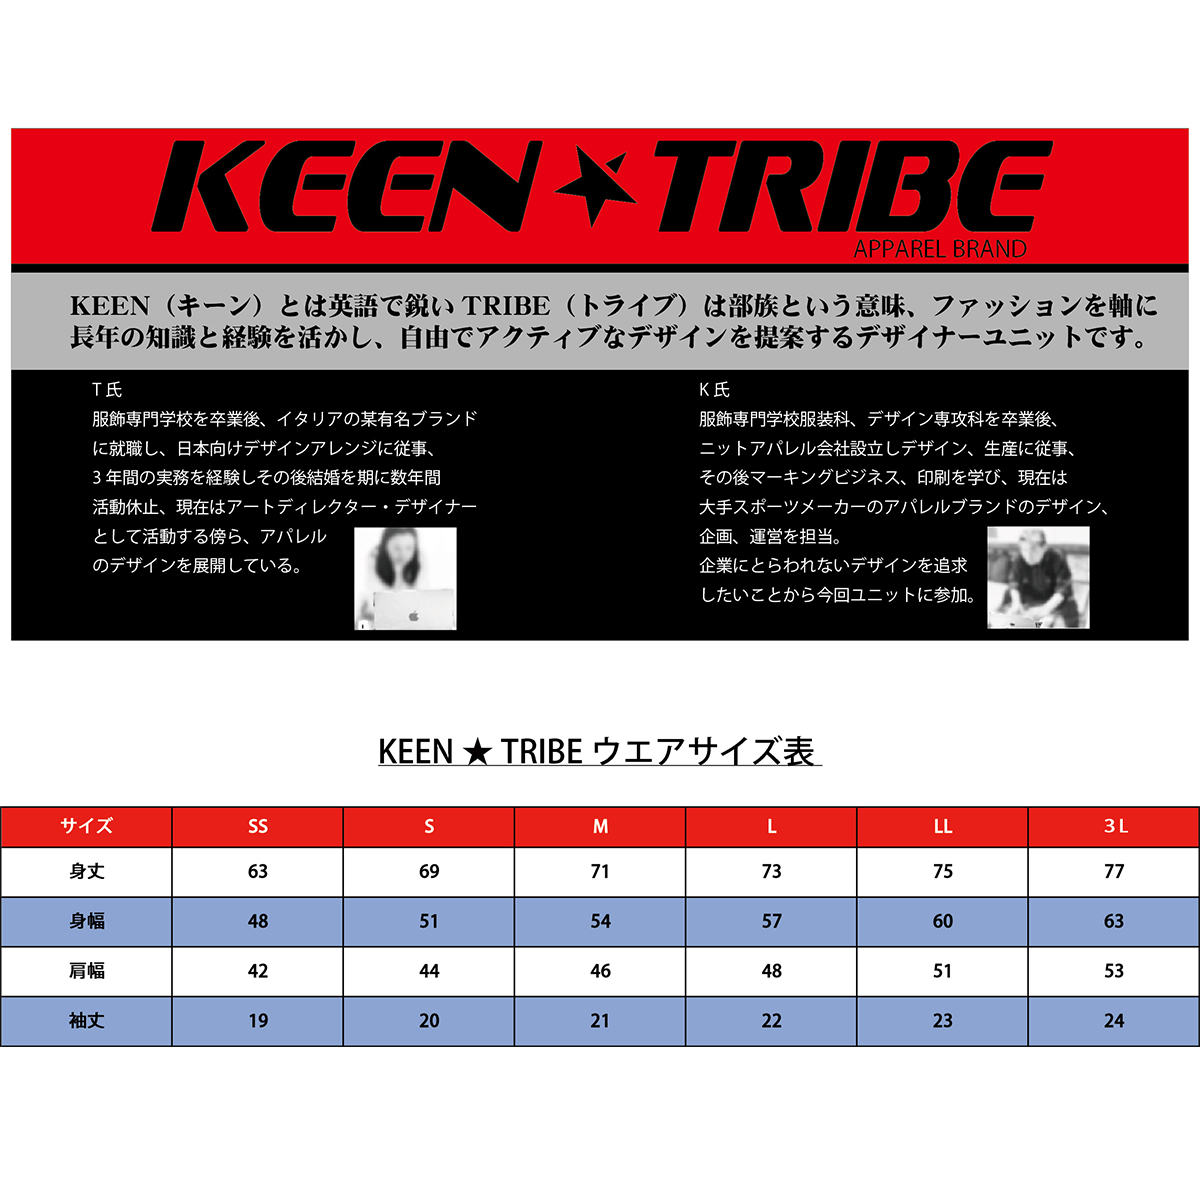 KEEN ★ TRIBE　KT-52(受注生産)